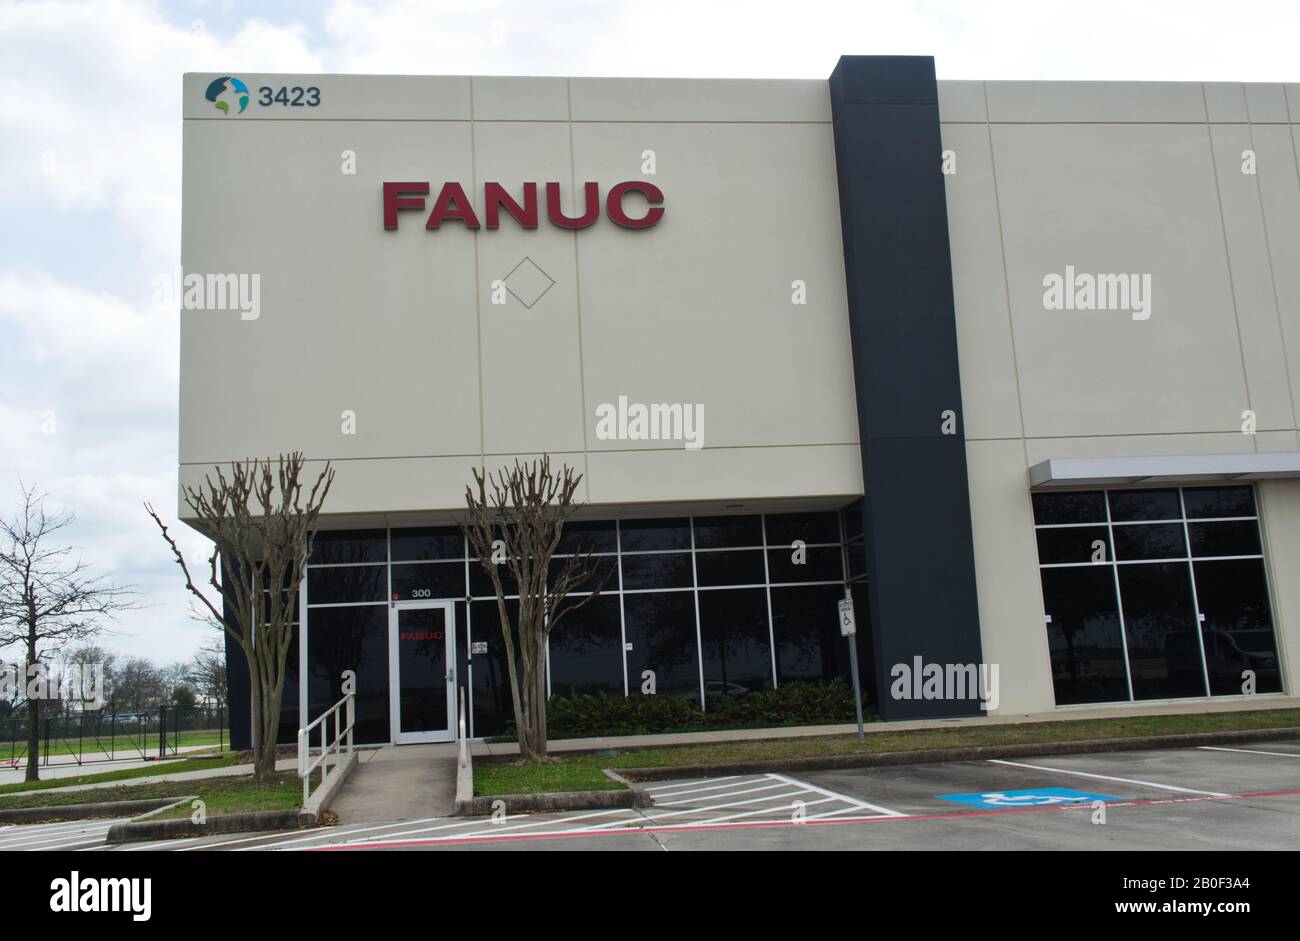 FANUC Corporation office building exterior in Houston, TX. The largest supplier of industrial automation robotics in the world, it was founded in 1958. Stock Photo